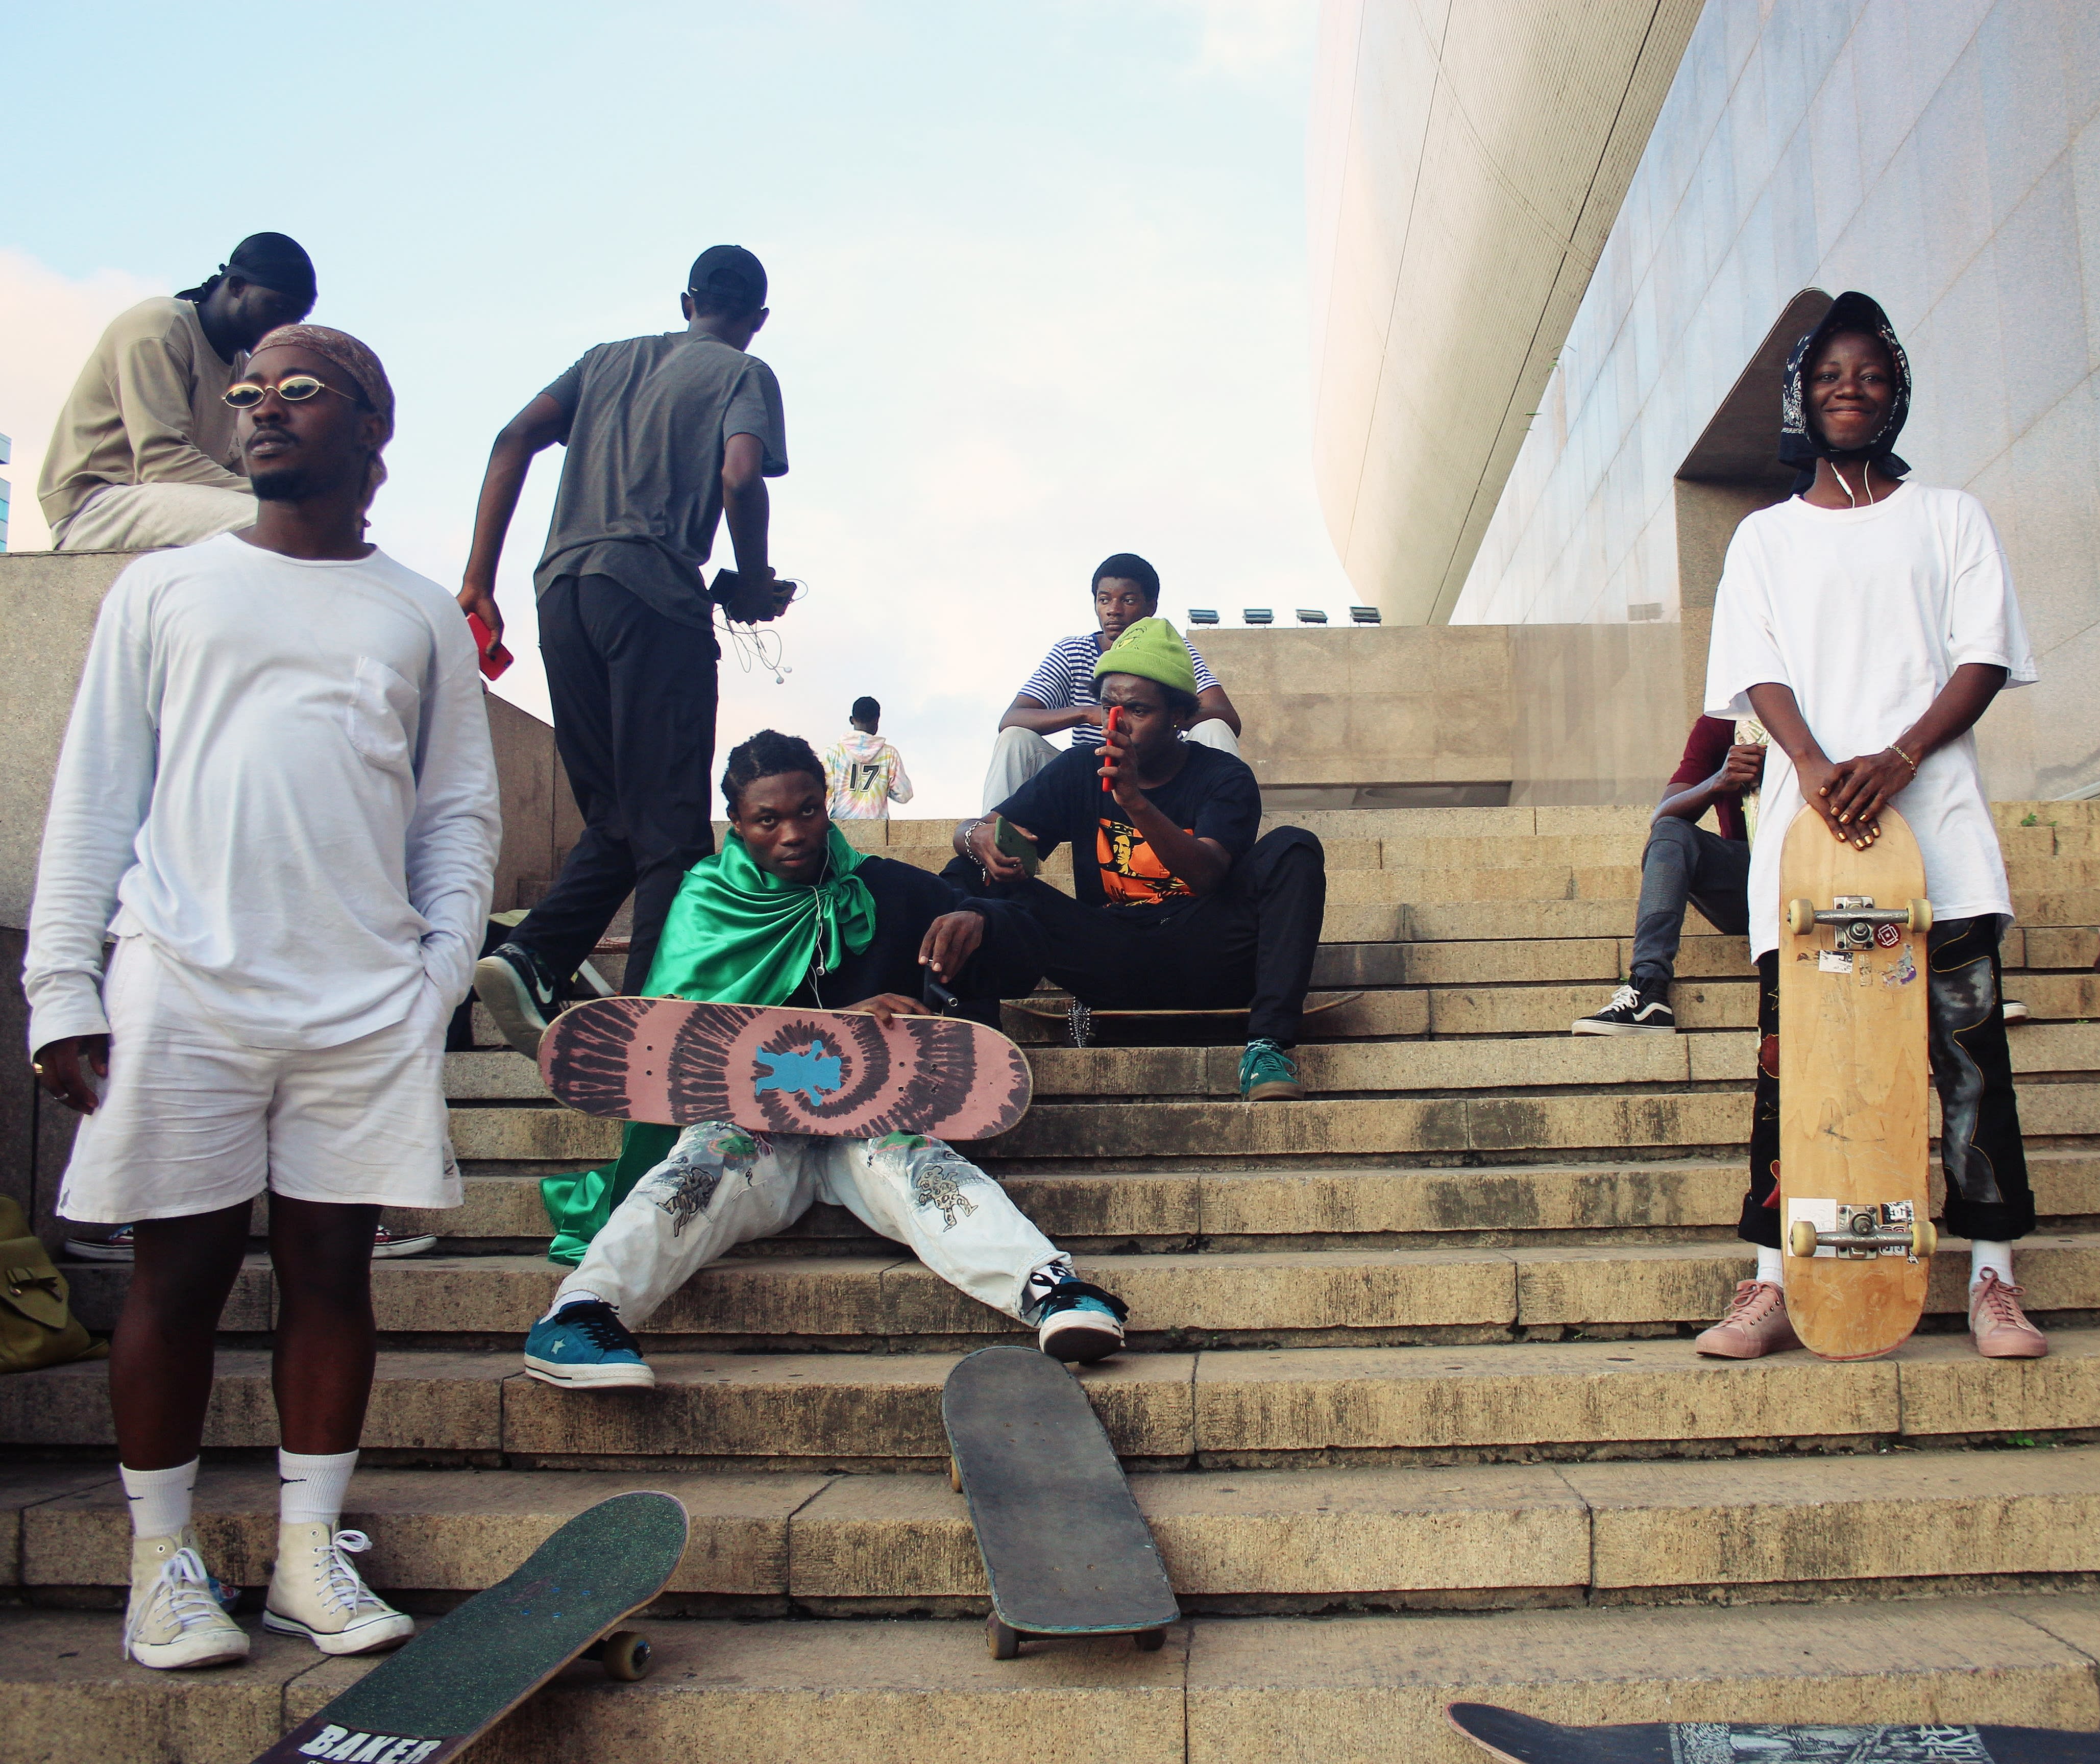 Virgil Abloh and Daily Paper Link Up to Help Bring New Skate Park